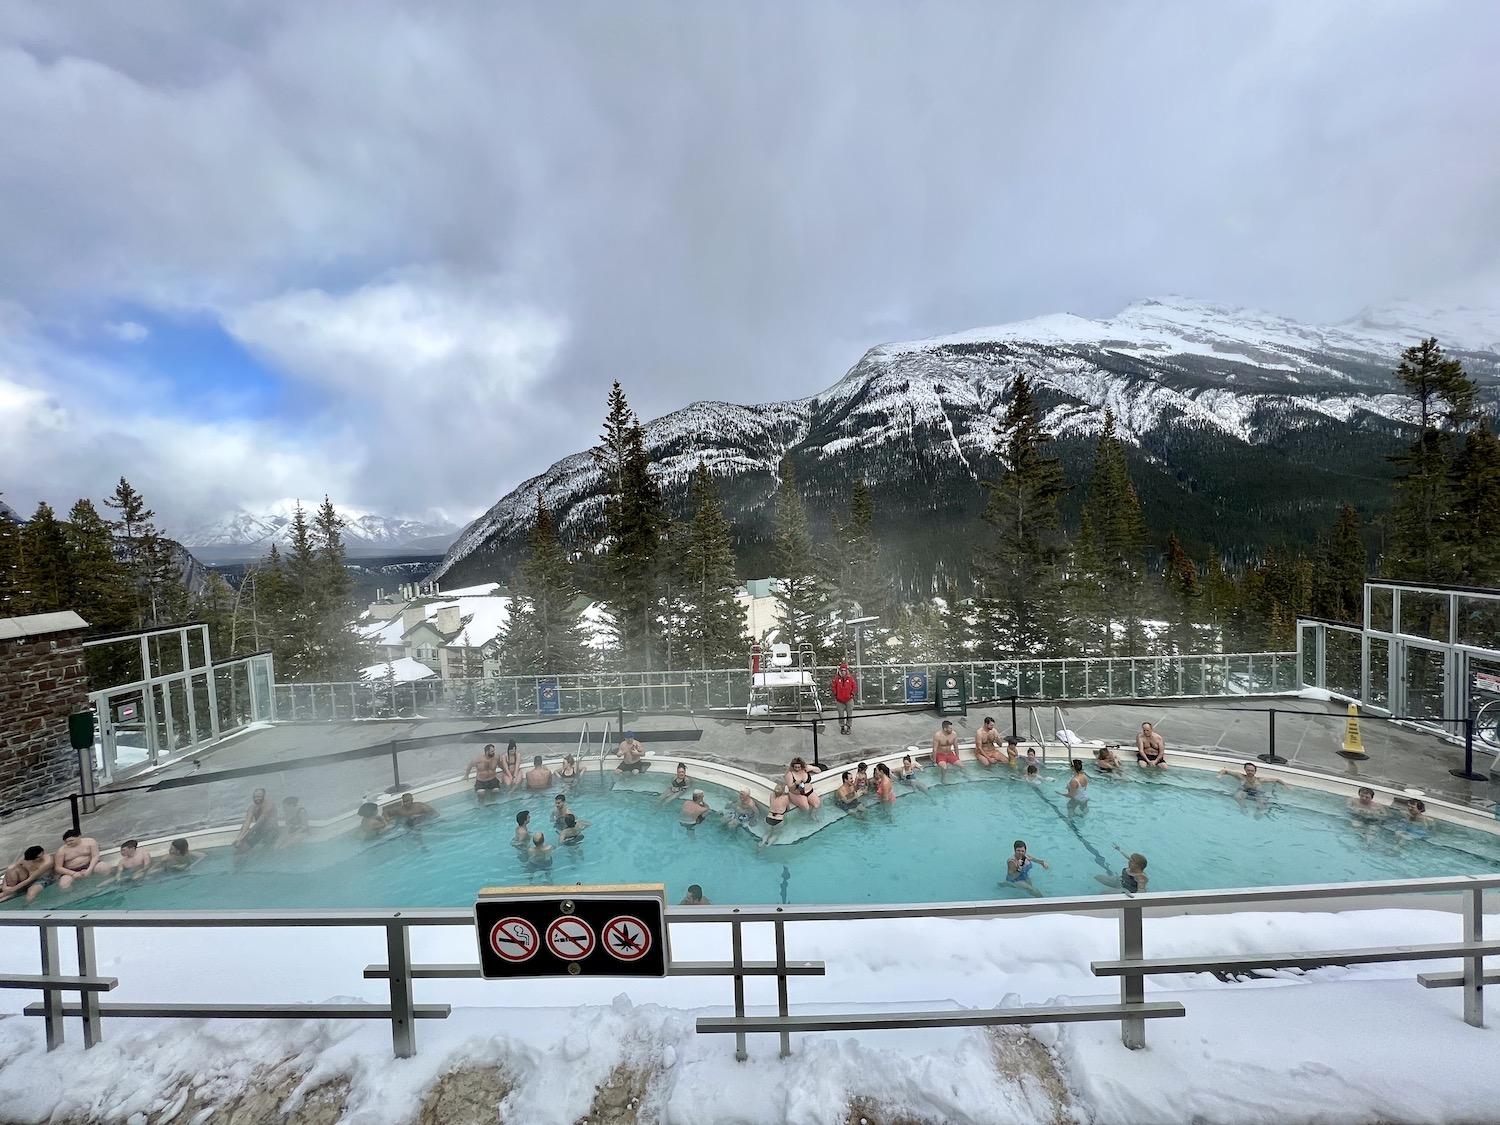 You can rent vintage swimwear to visit the Banff Upper Hot Springs.